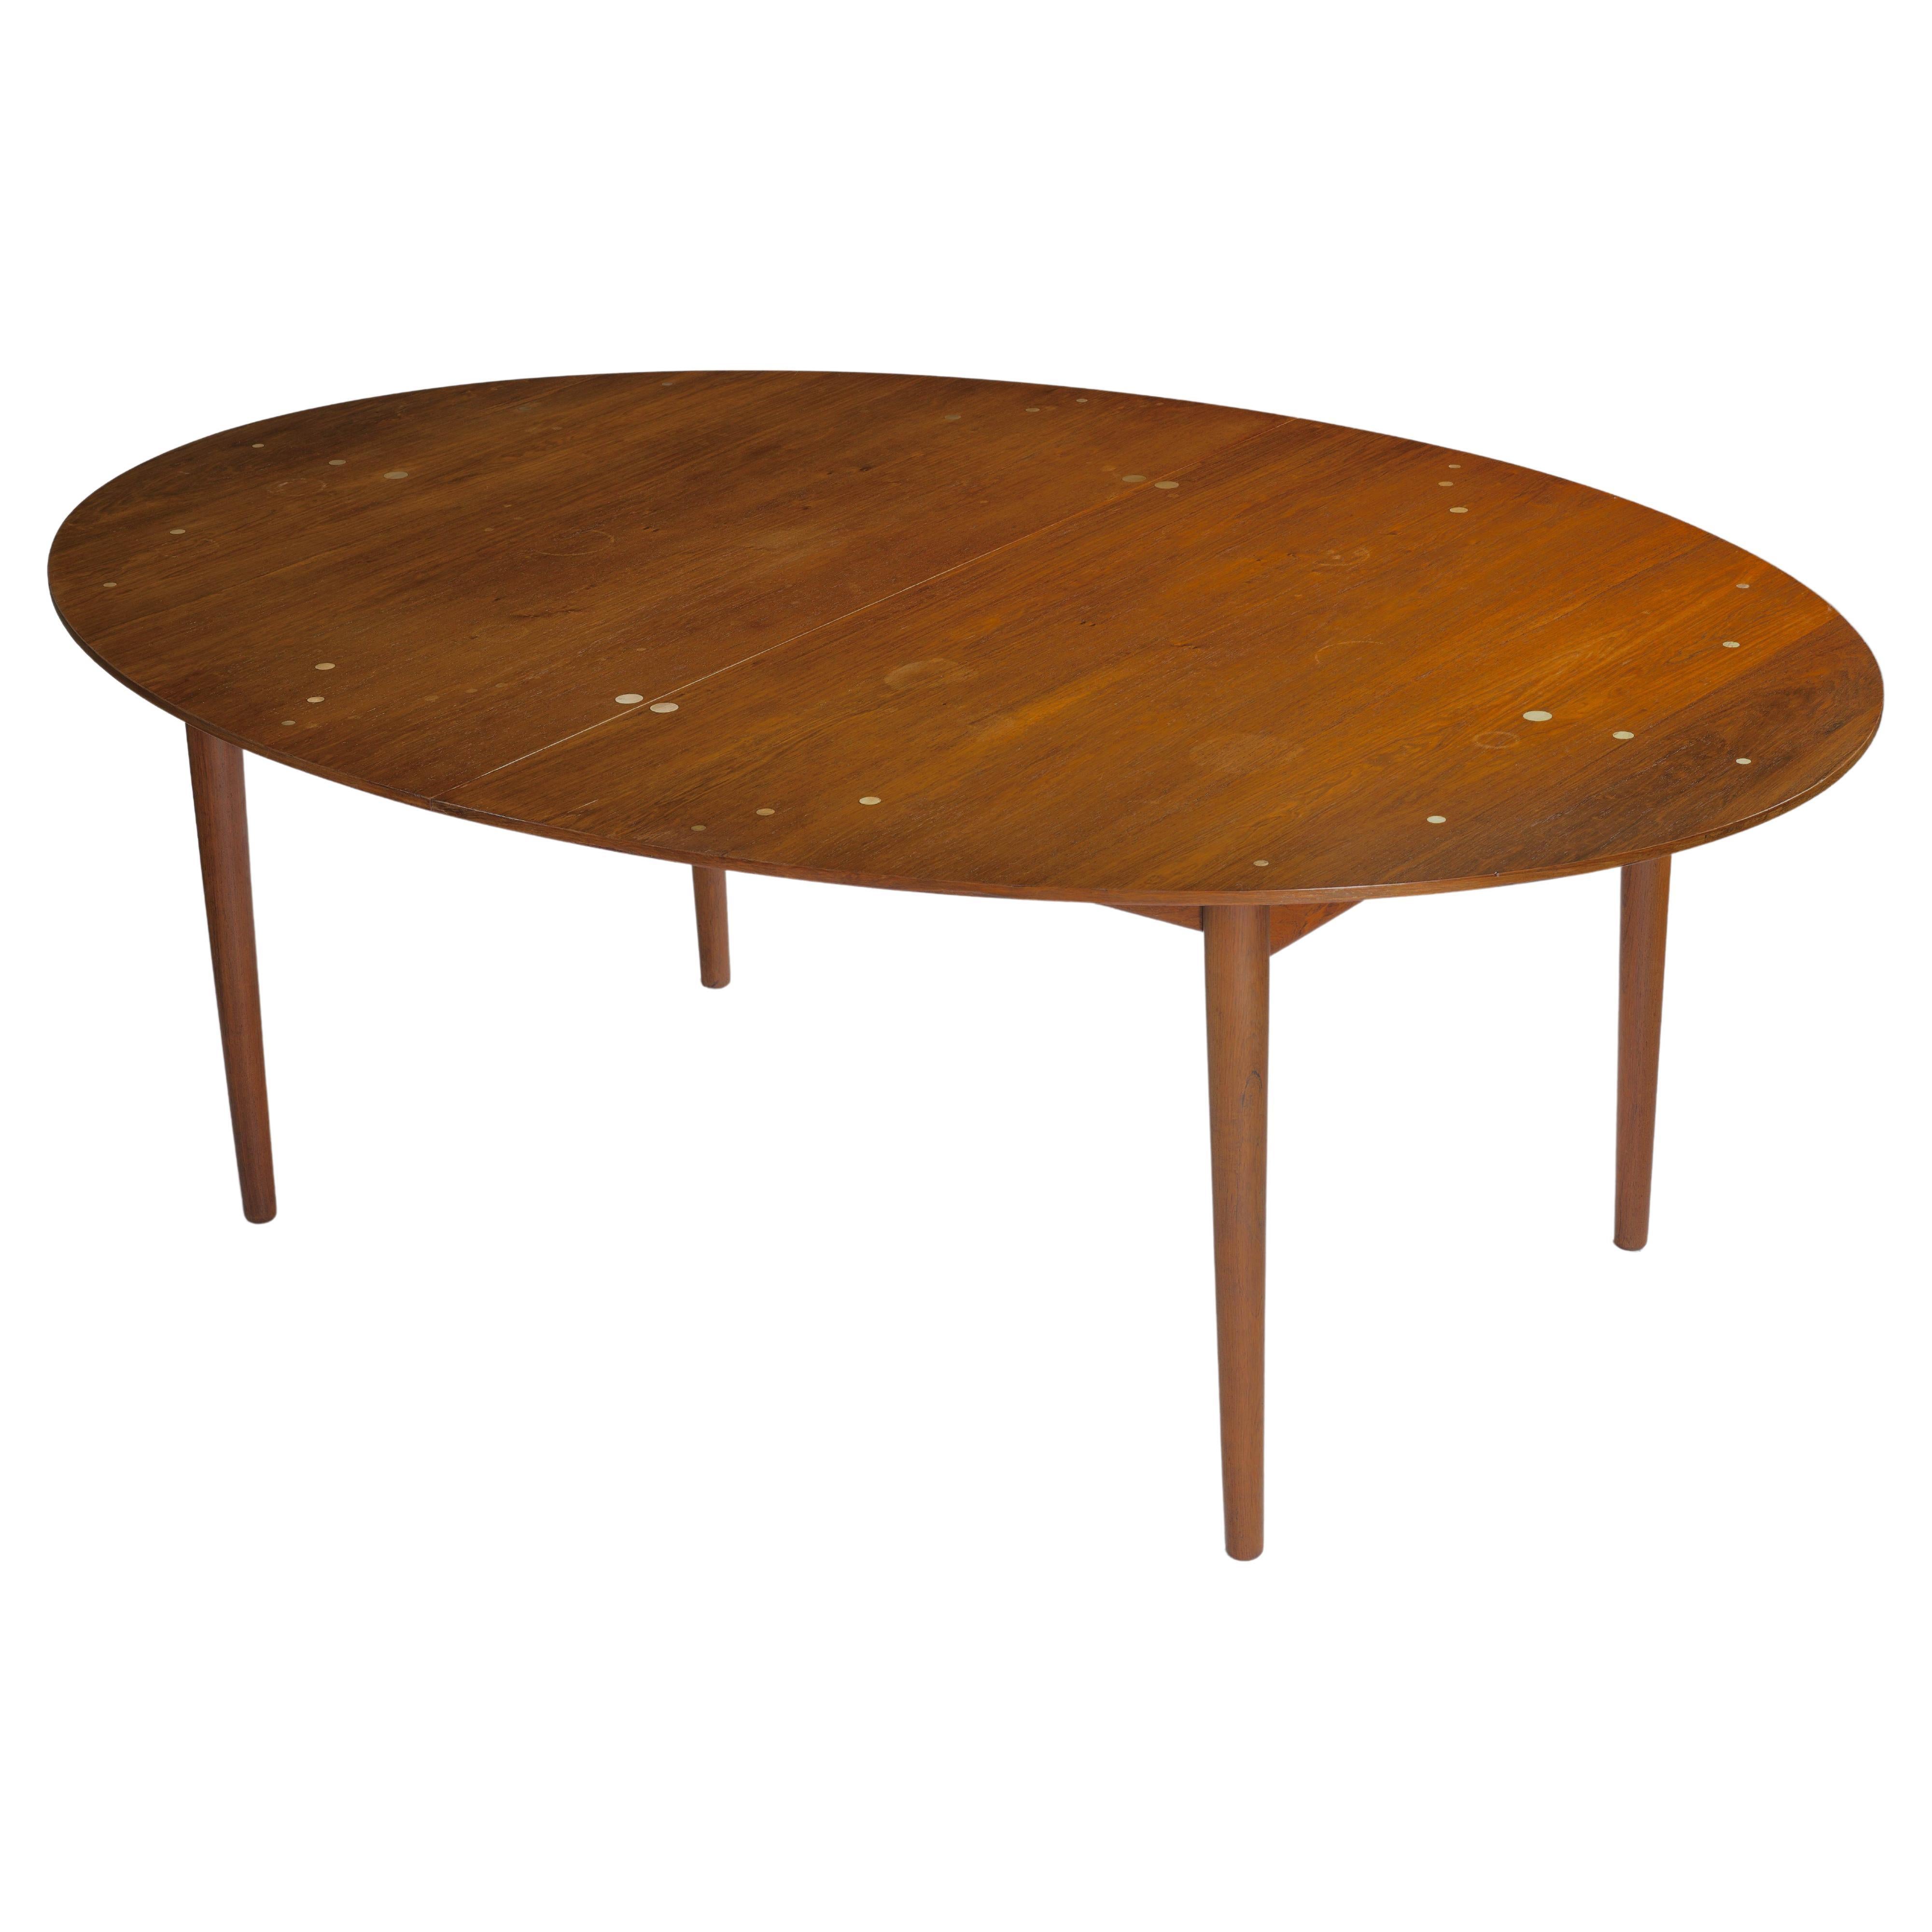 Mid-Century dining table designed by Finn Juhl for Niels Vodder. Made in Denmark, 1948. 

The 'Judas' table deserves to be seen as the embodiment of fundamental Mid-Century Danish design principles. It shows exceptional craftsmanship and attention